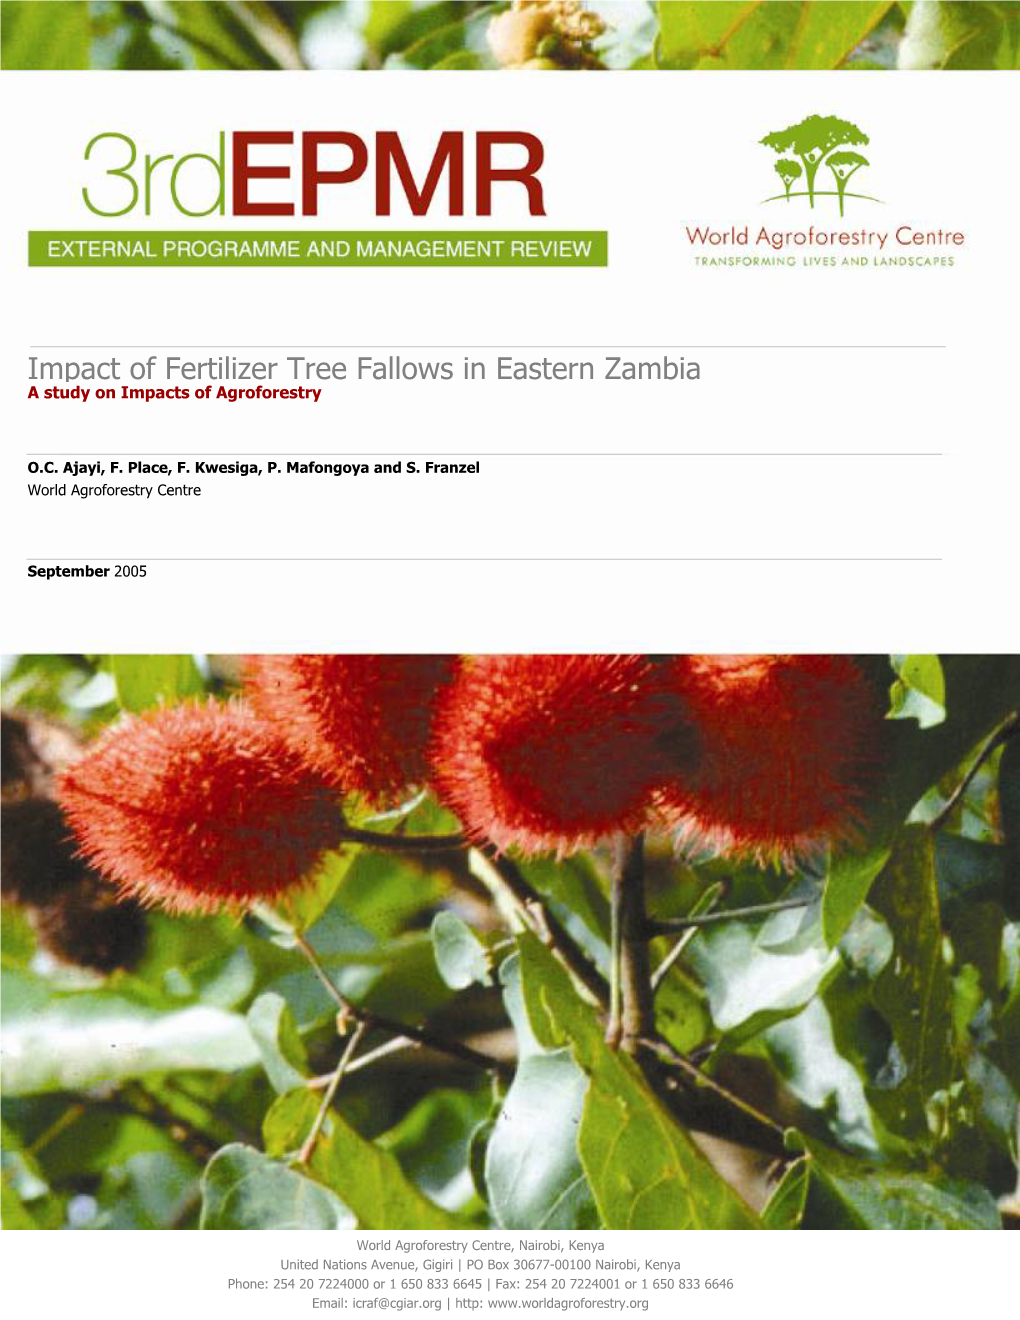 Impact of Fertilizer Tree Fallows in Eastern Zambia a Study on Impacts of Agroforestry